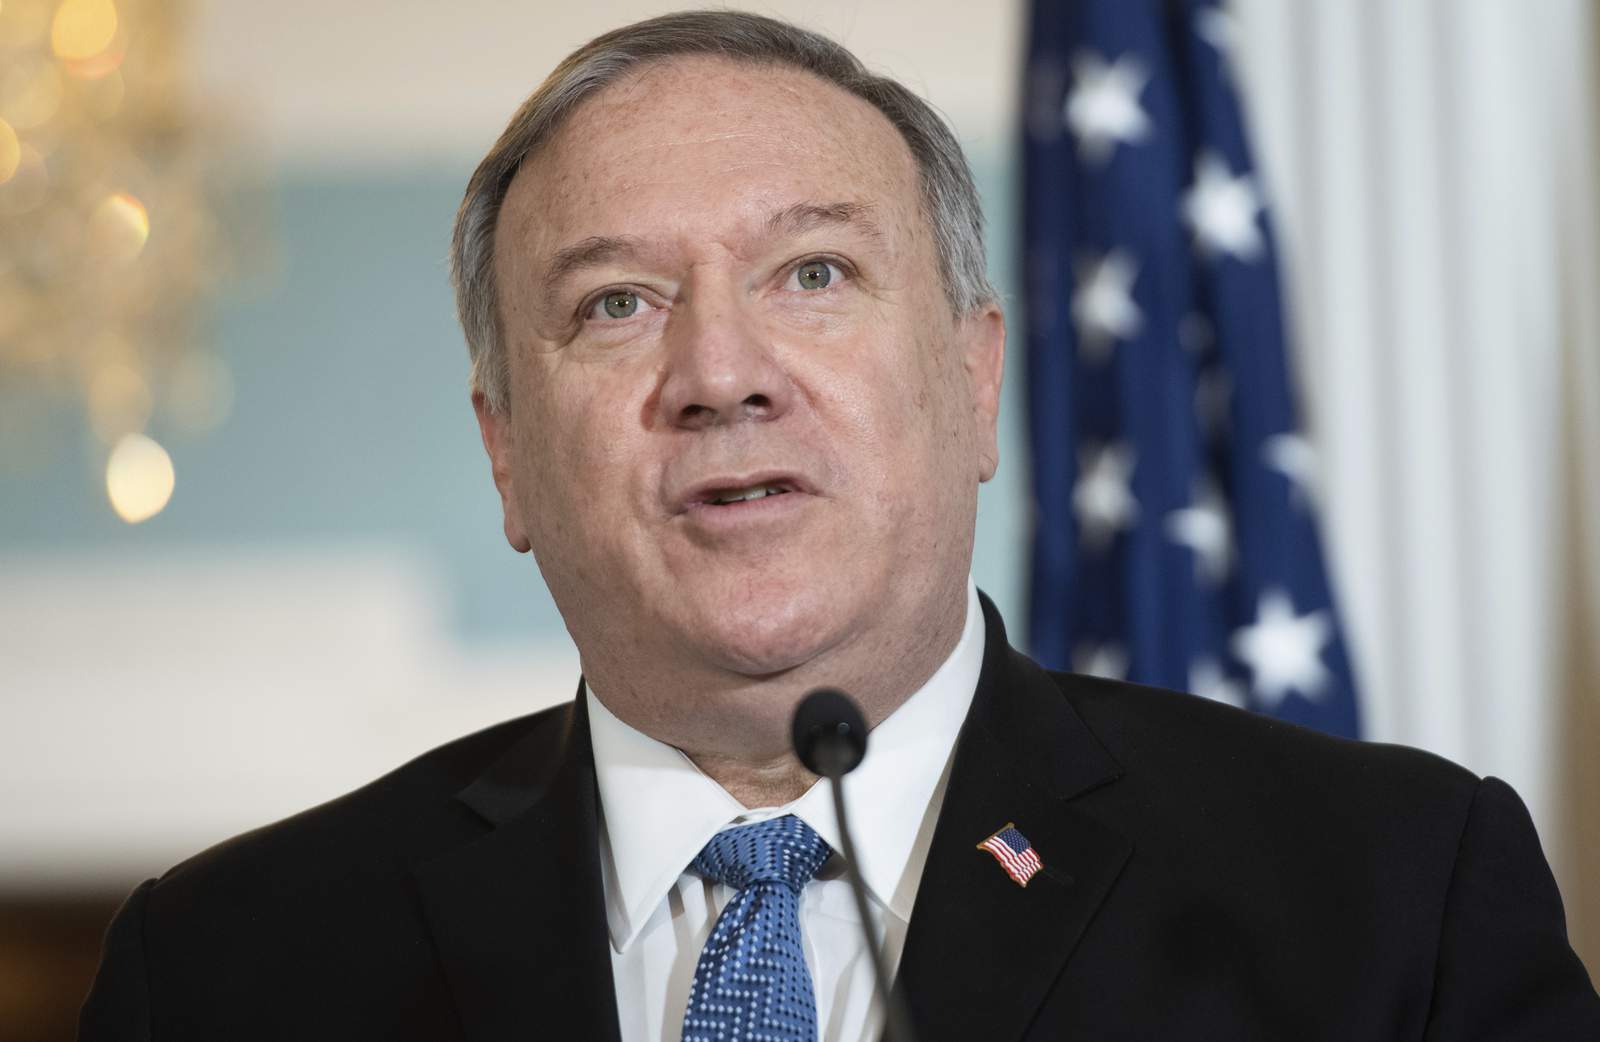 Chinese state media blast latest Pompeo move on Taiwan